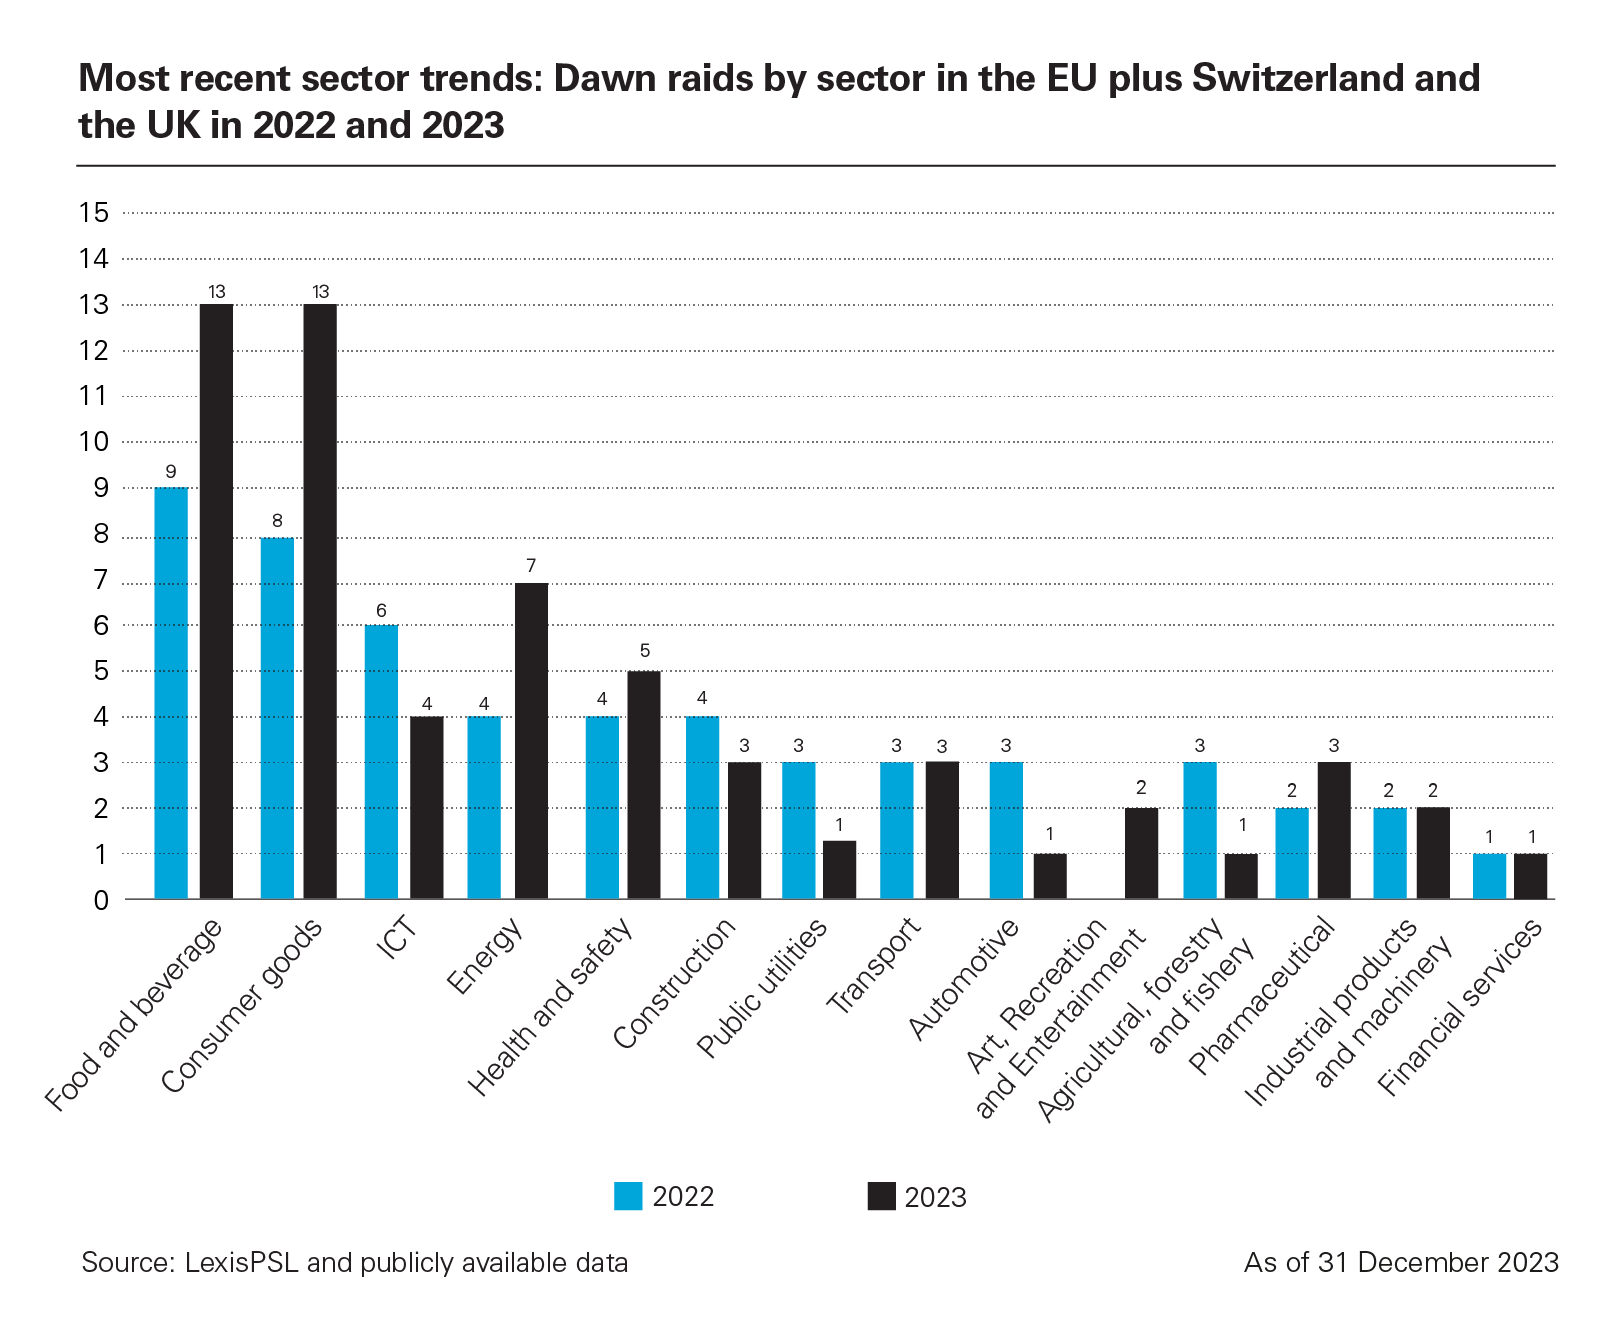 Most recent sector trends: Dawn raids by sector in the EU plus Switzerland and the UK in 2022 and Q1 – Q4